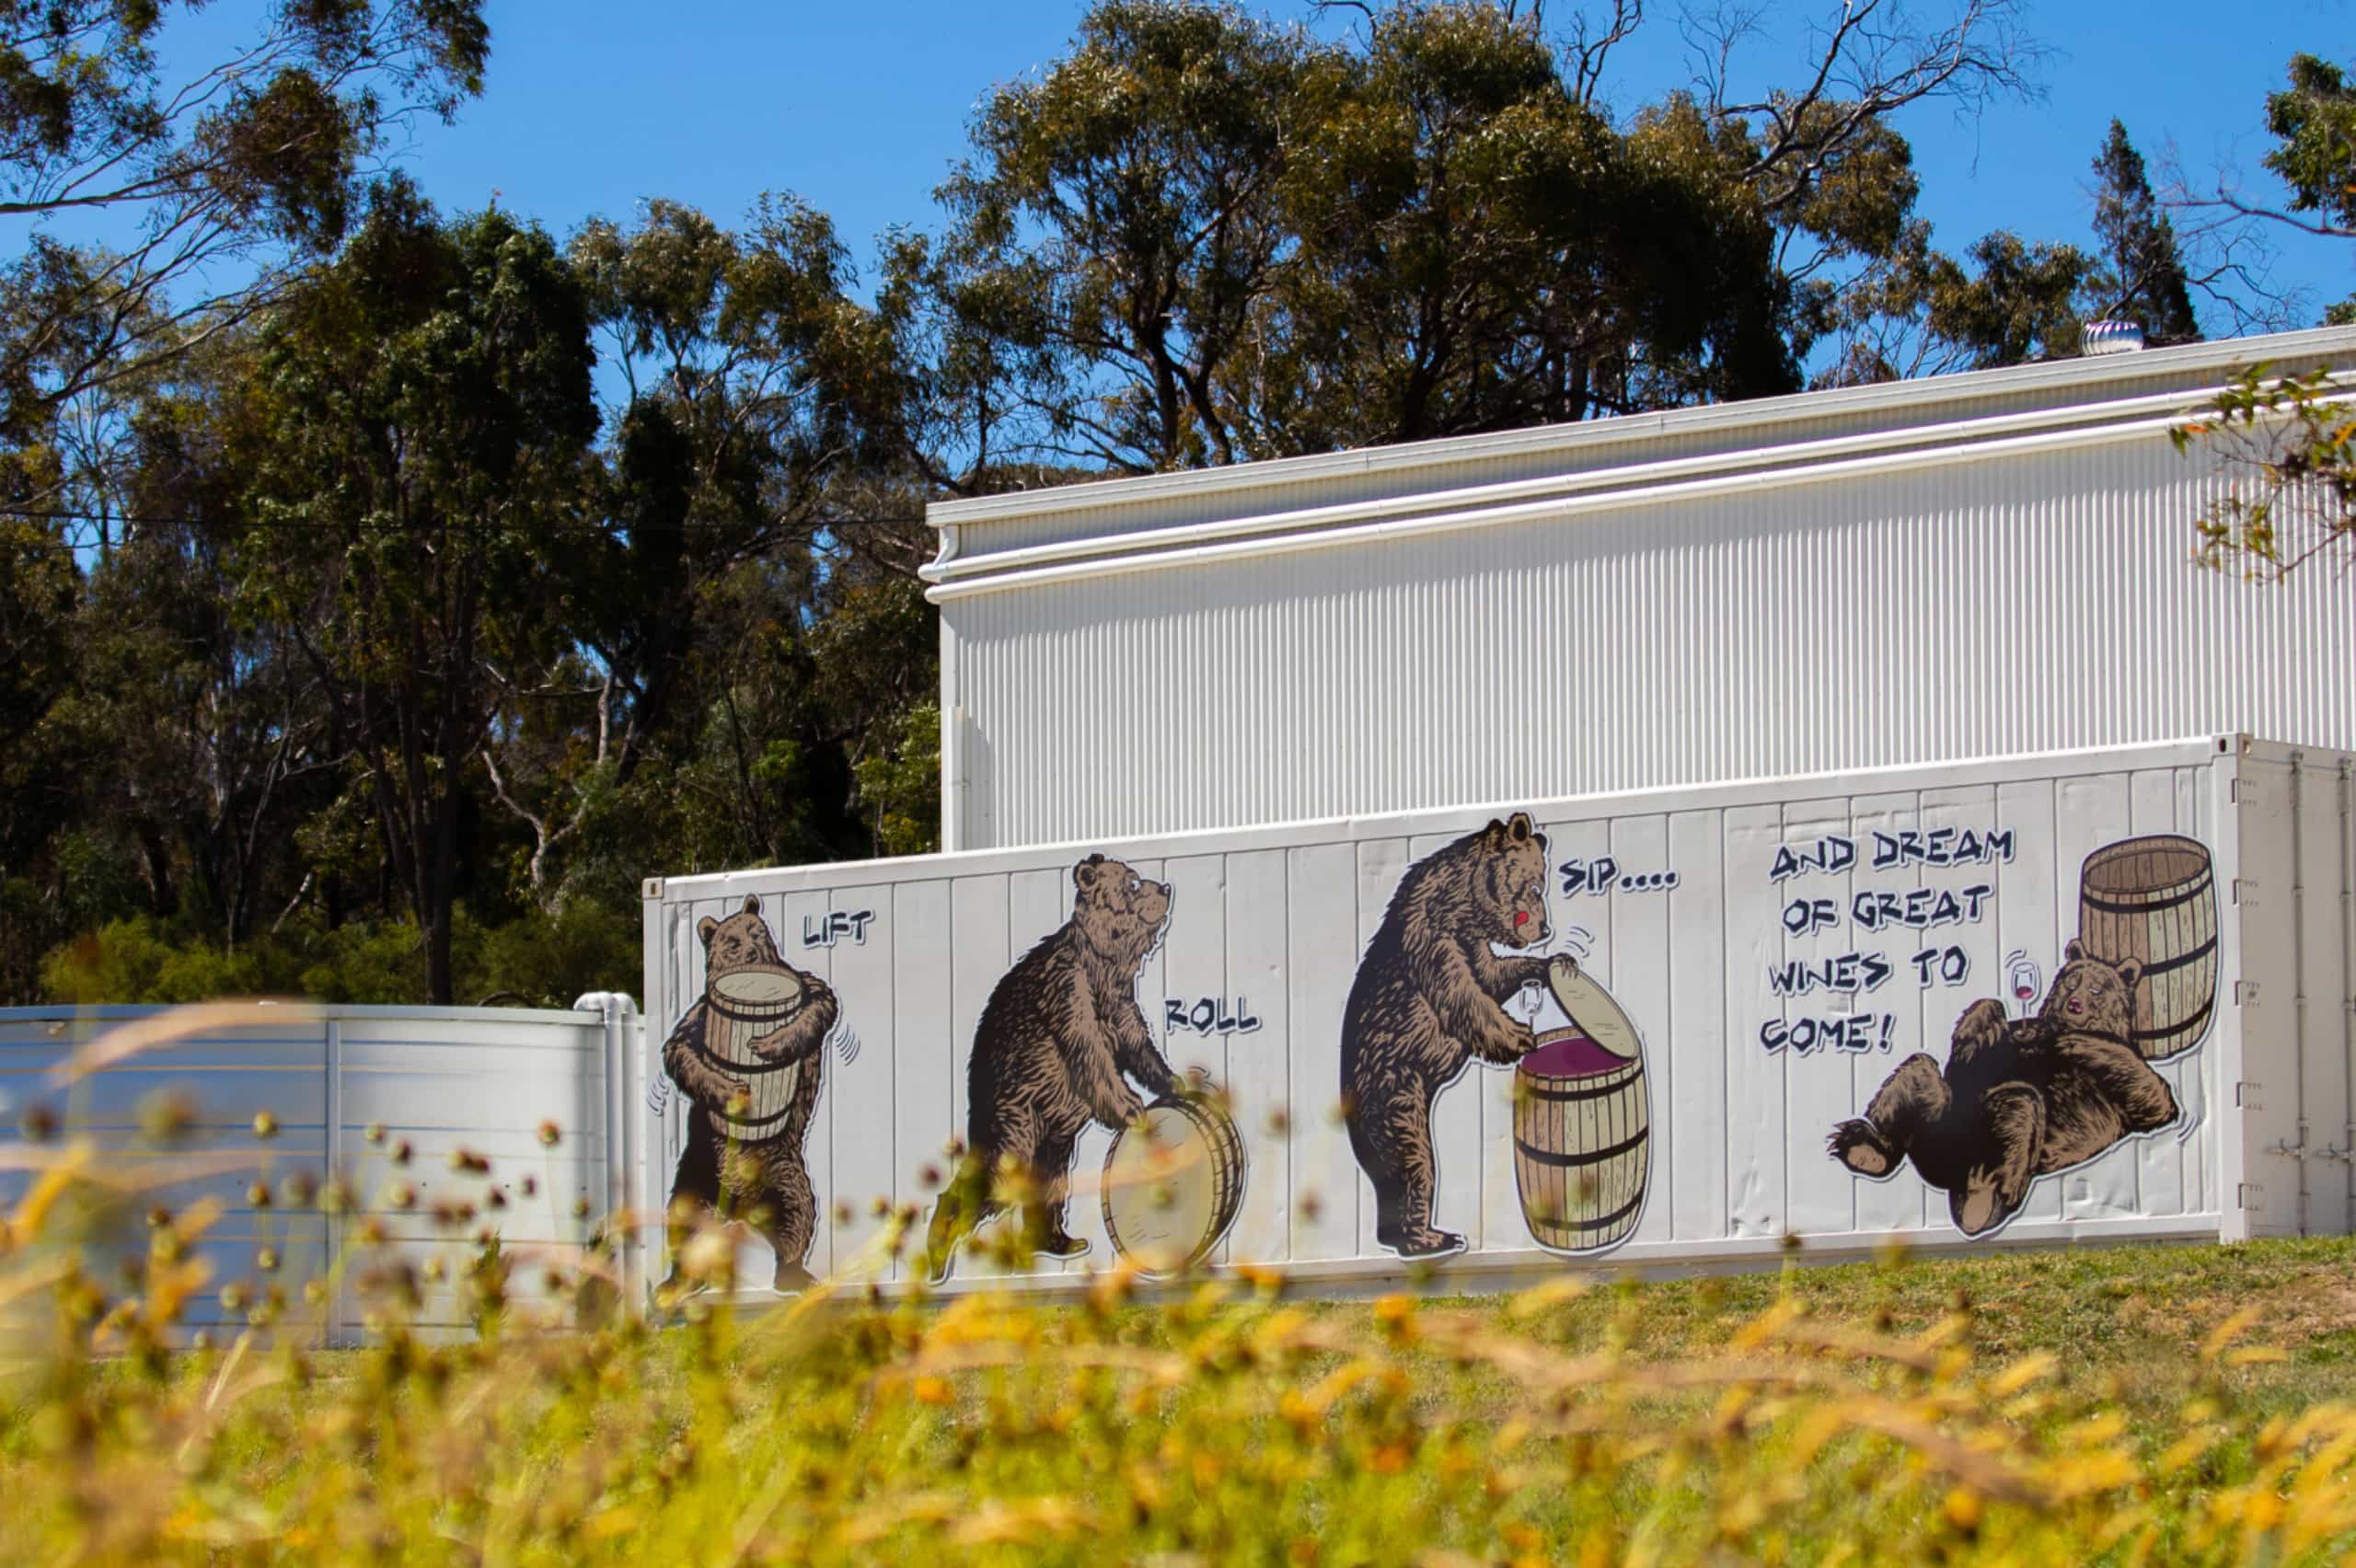 A shed at the Art of Krupinski vineyard and estate with a bear painted on the side